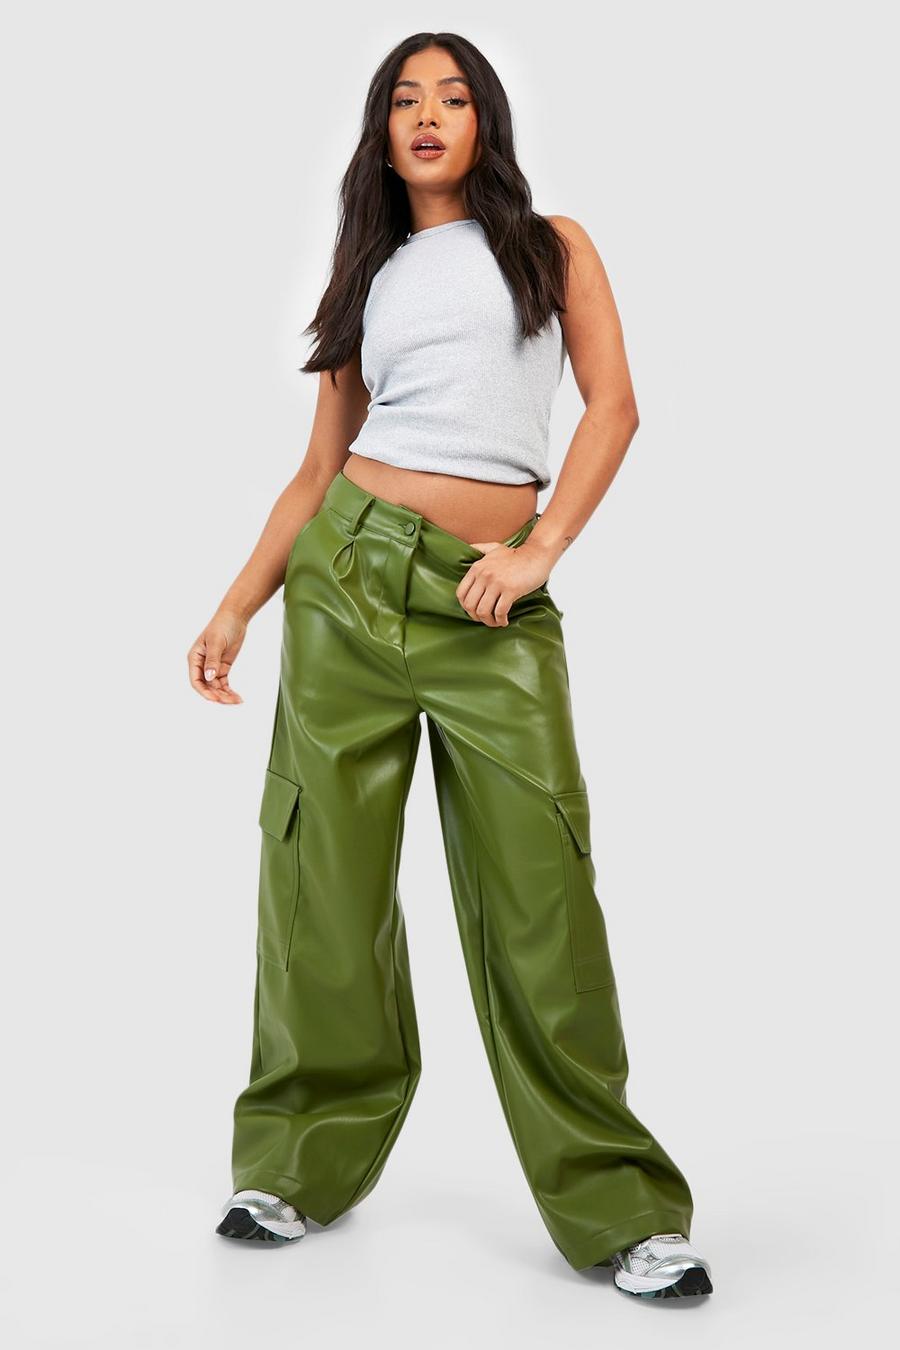 Khaki Petite Leather Look High Waisted Cargo Pants image number 1